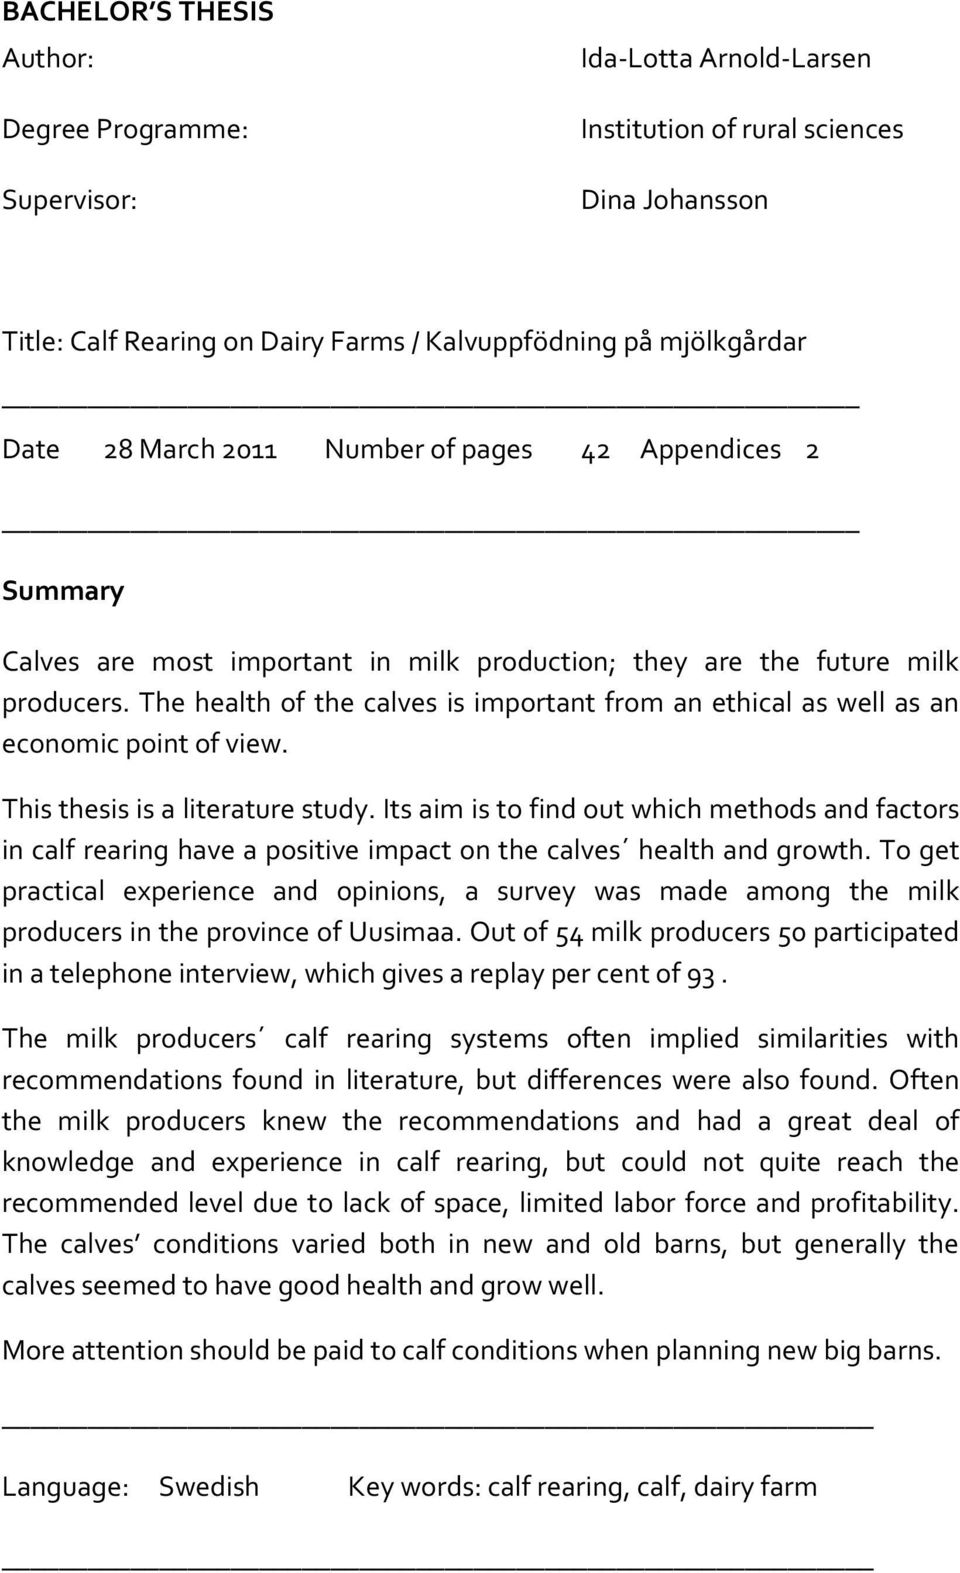 The health of the calves is important from an ethical as well as an economic point of view. This thesis is a literature study.